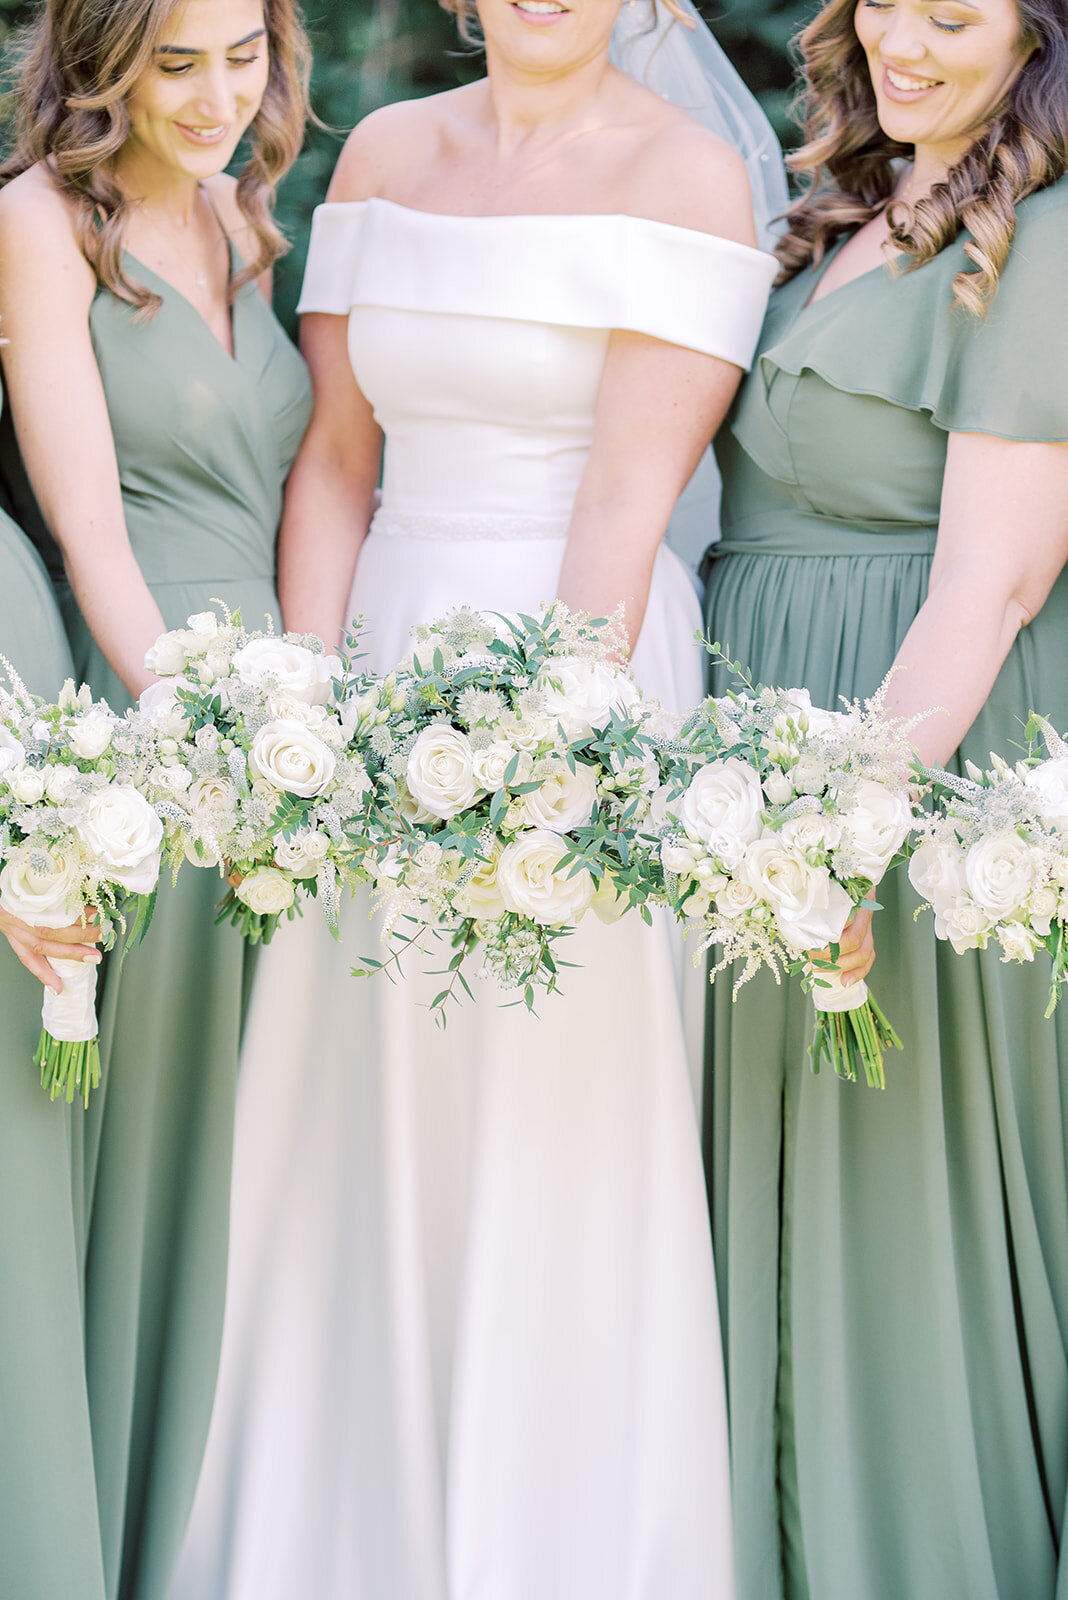 Bride and her bridesmaids, the bride is wearing a white satin dress and the bridesmaids are in sage green dresses, they are holding their bouqets out in front of them and image focuses on the bouquets. the flowers are white roses with eucalyptus